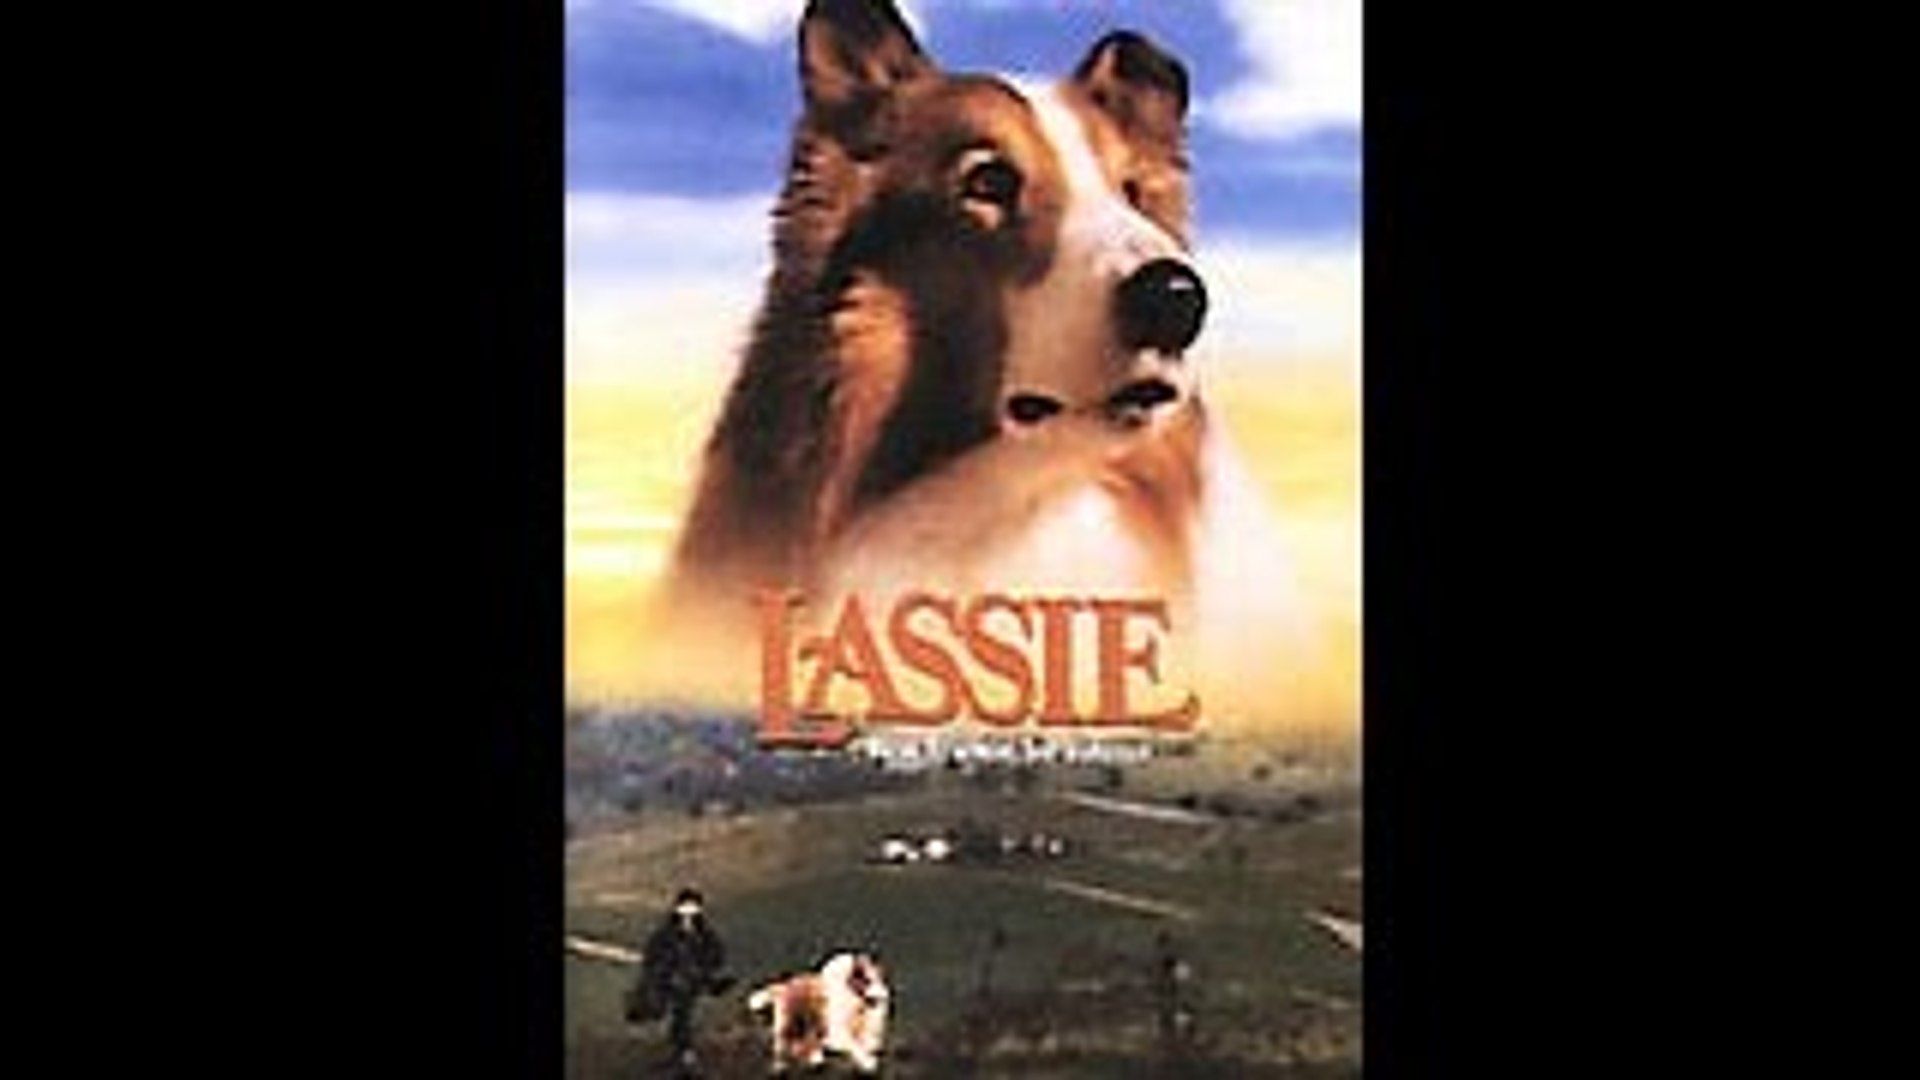 Opening To The Lassie Movie 1999 VHS